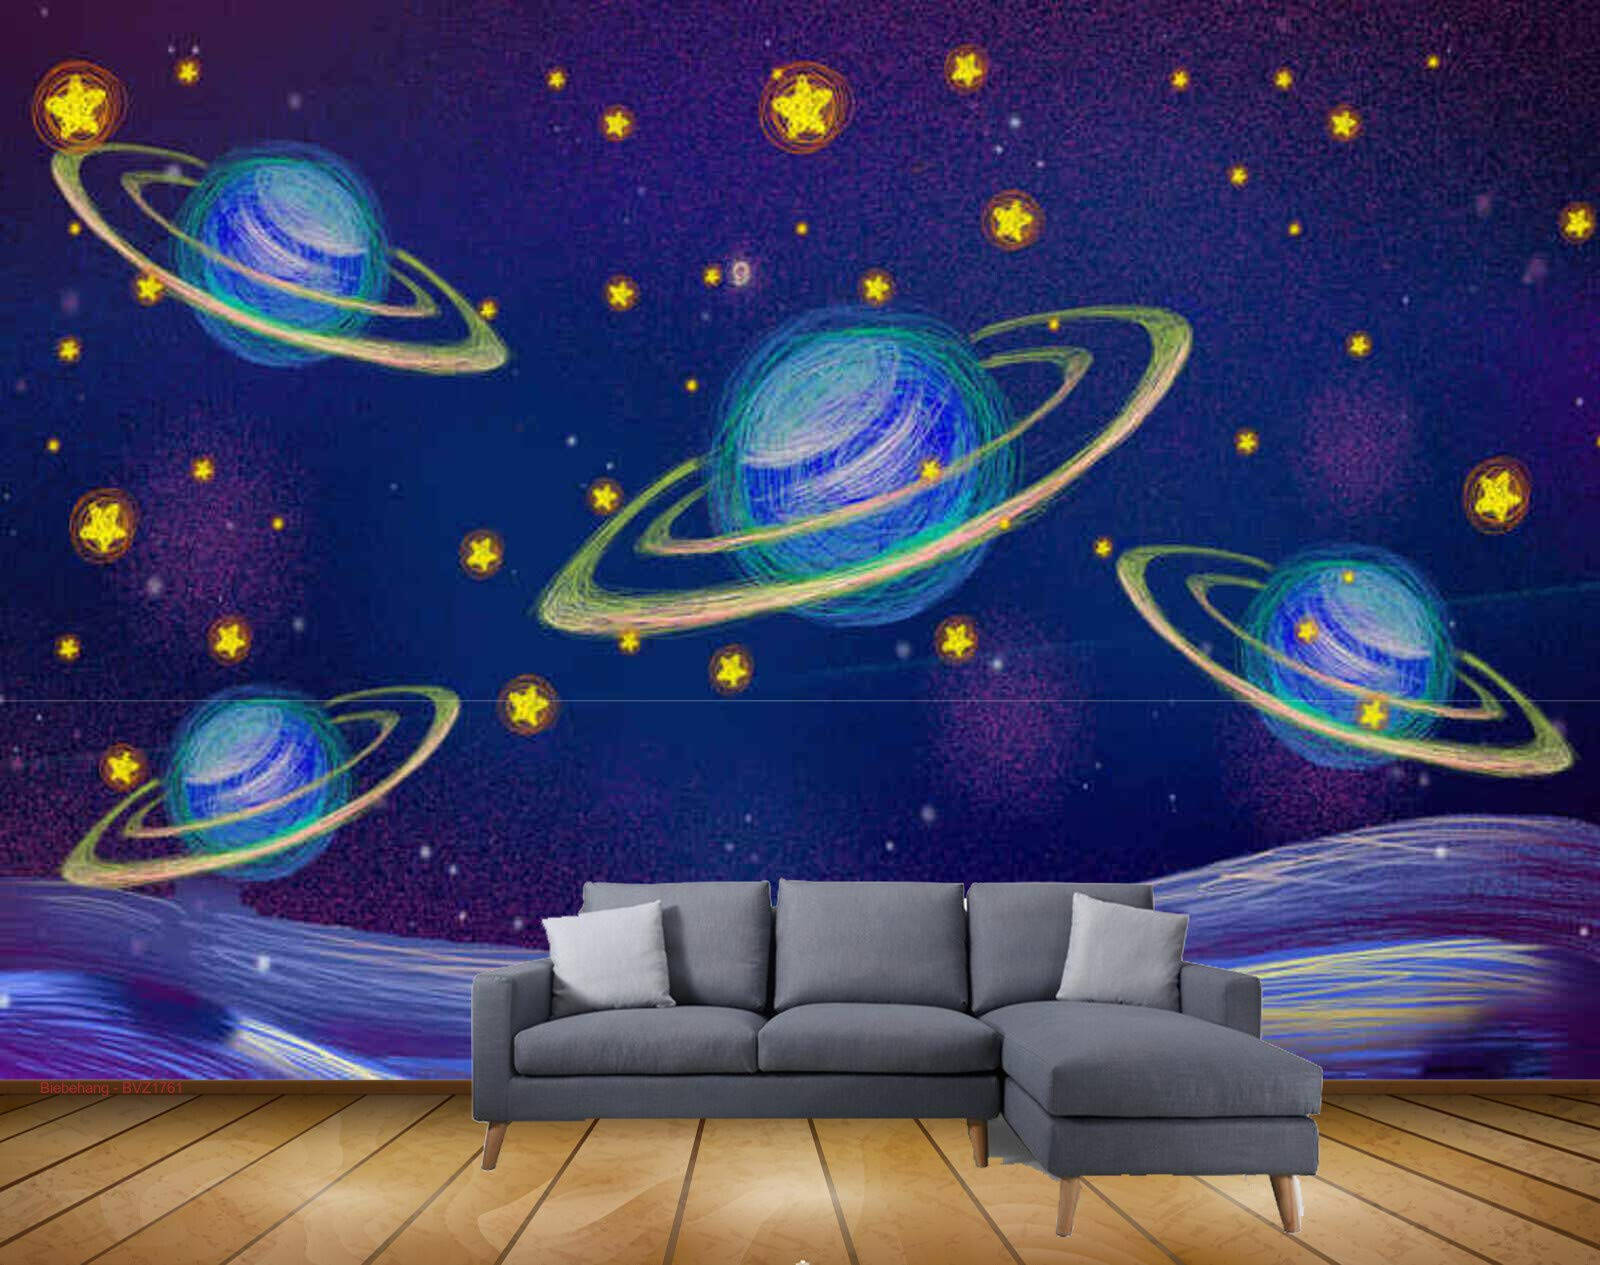 Room With Cool Universal Wall Wallpaper